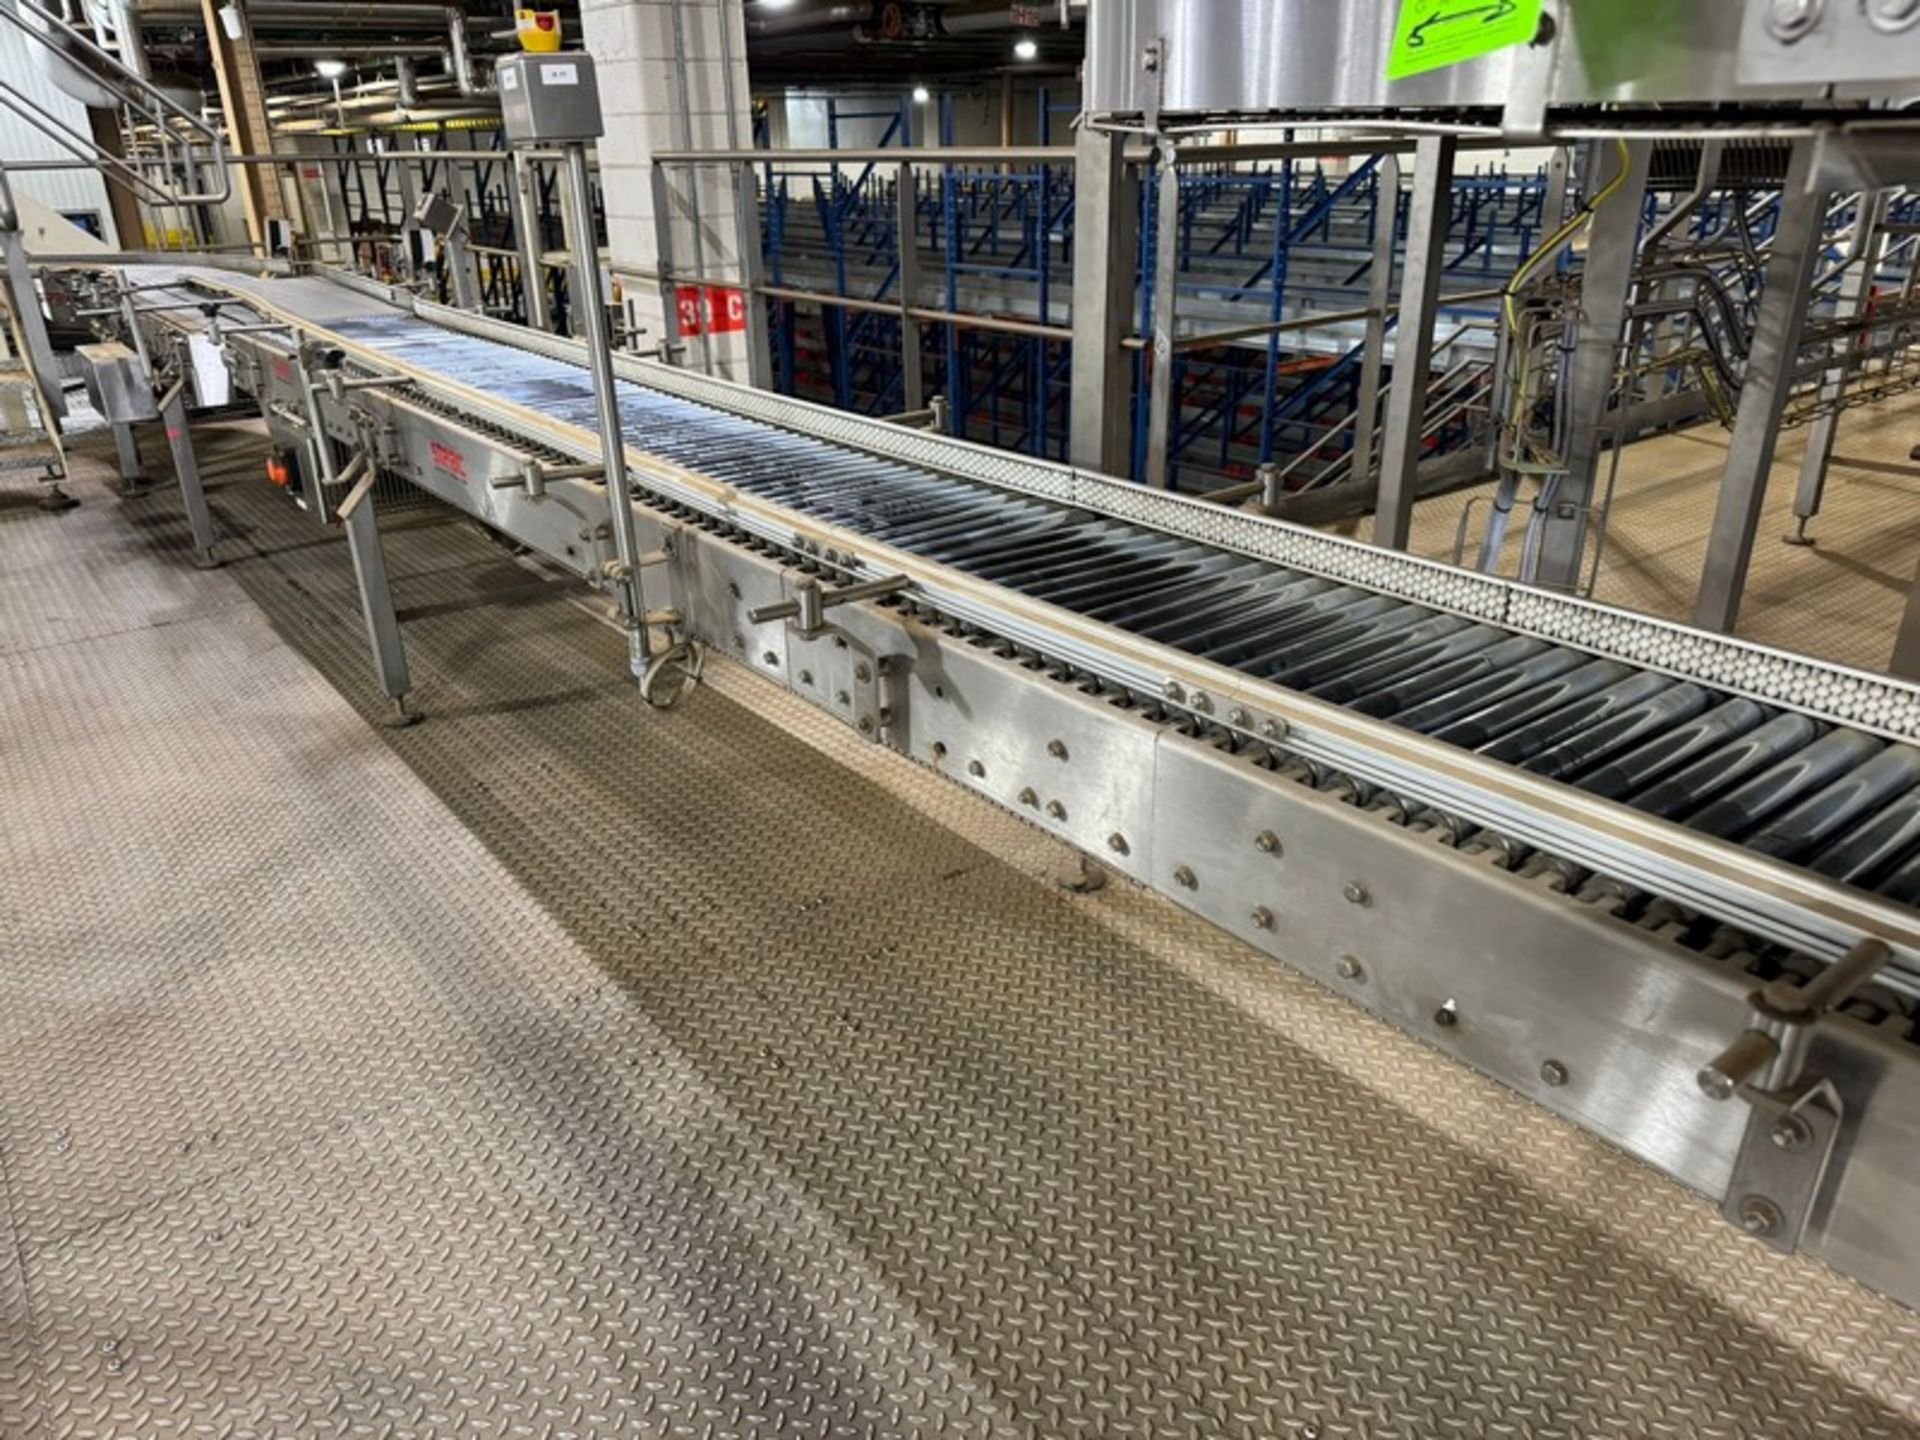 Section of Conveyor, with 1-Section of SIPAC Roller Conveyor, with 1-Section of 90 Degree Turn - Image 6 of 12